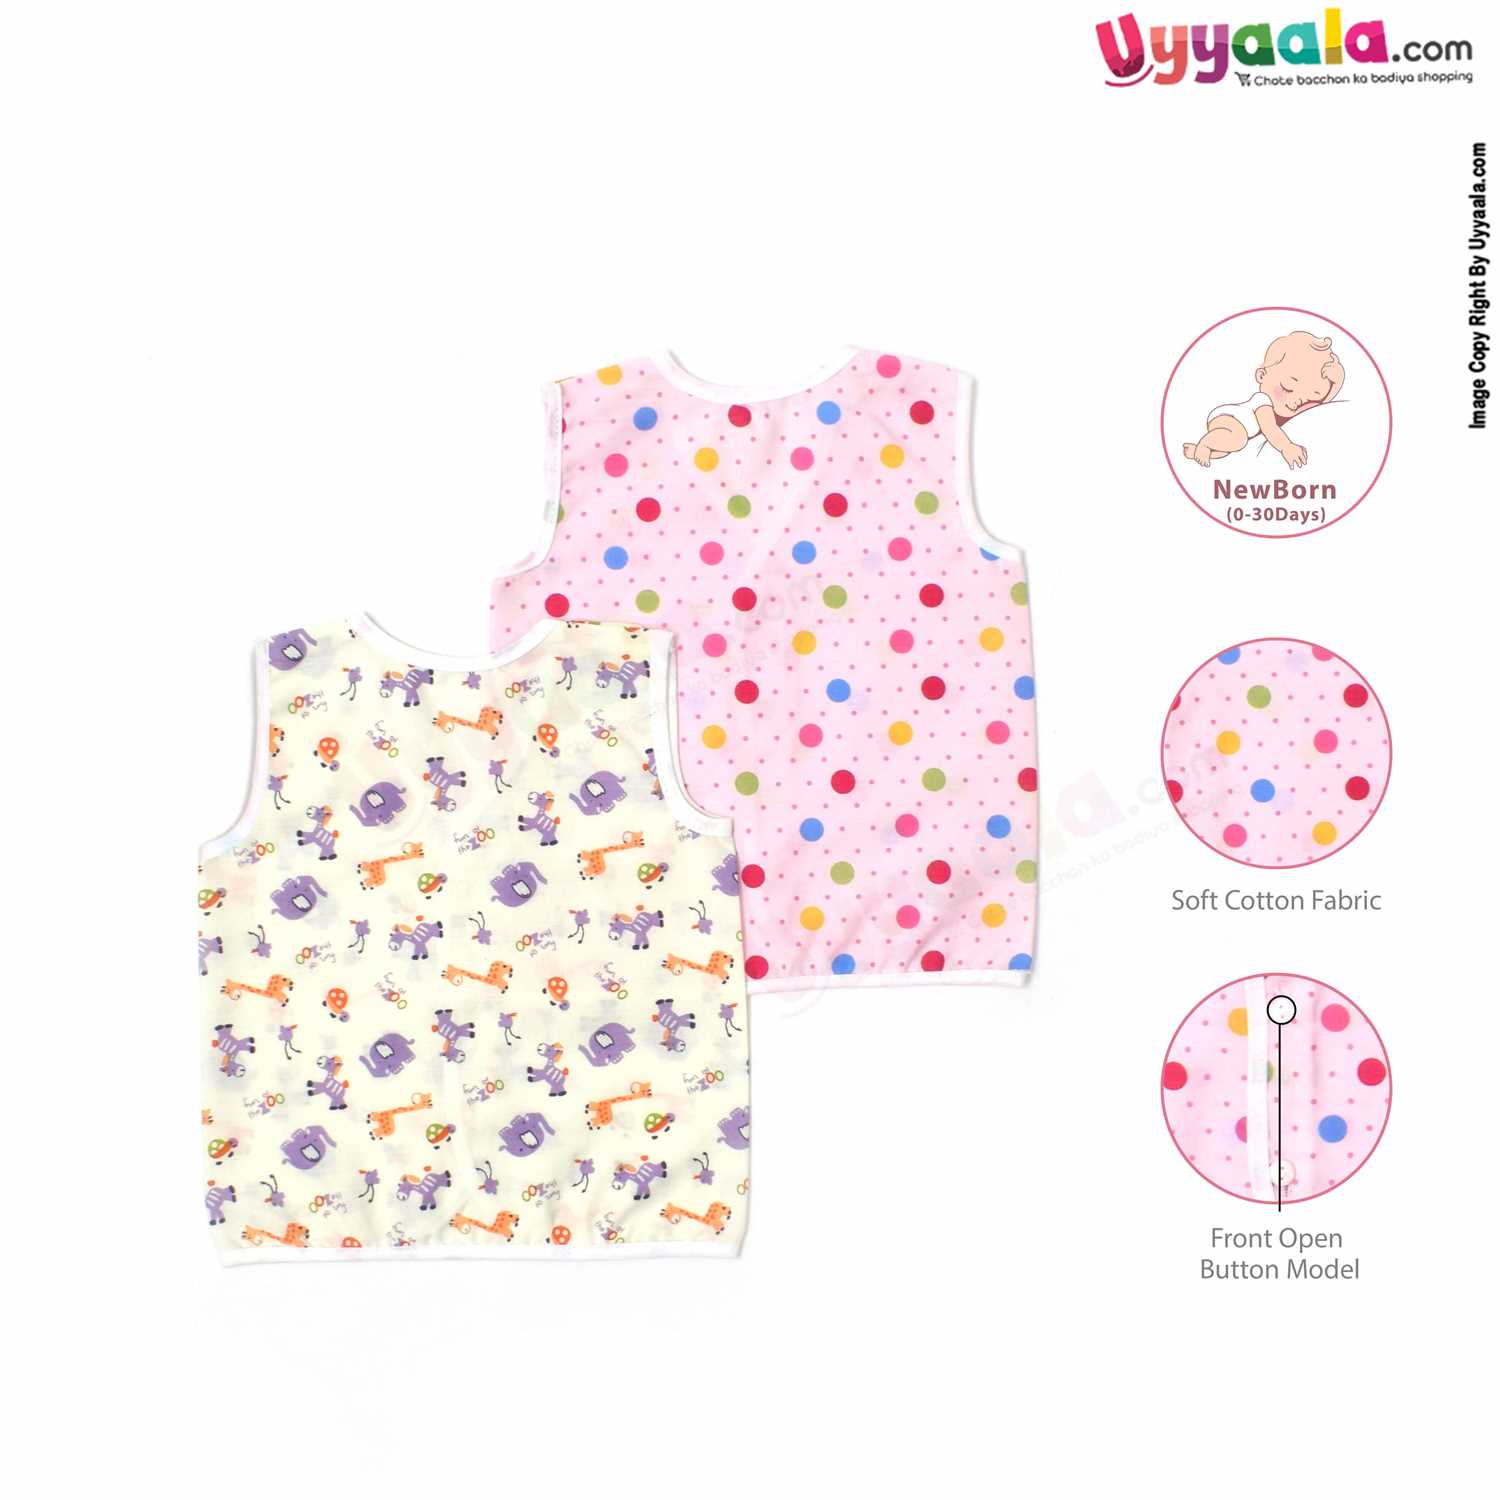 SNUG UP Sleeveless Baby Jabla Set, Front Opening Button Model, Premium Quality Cotton Baby Wear, (0-30 Days), 2 Pack, Dots & Animals Print - Pink & Cream